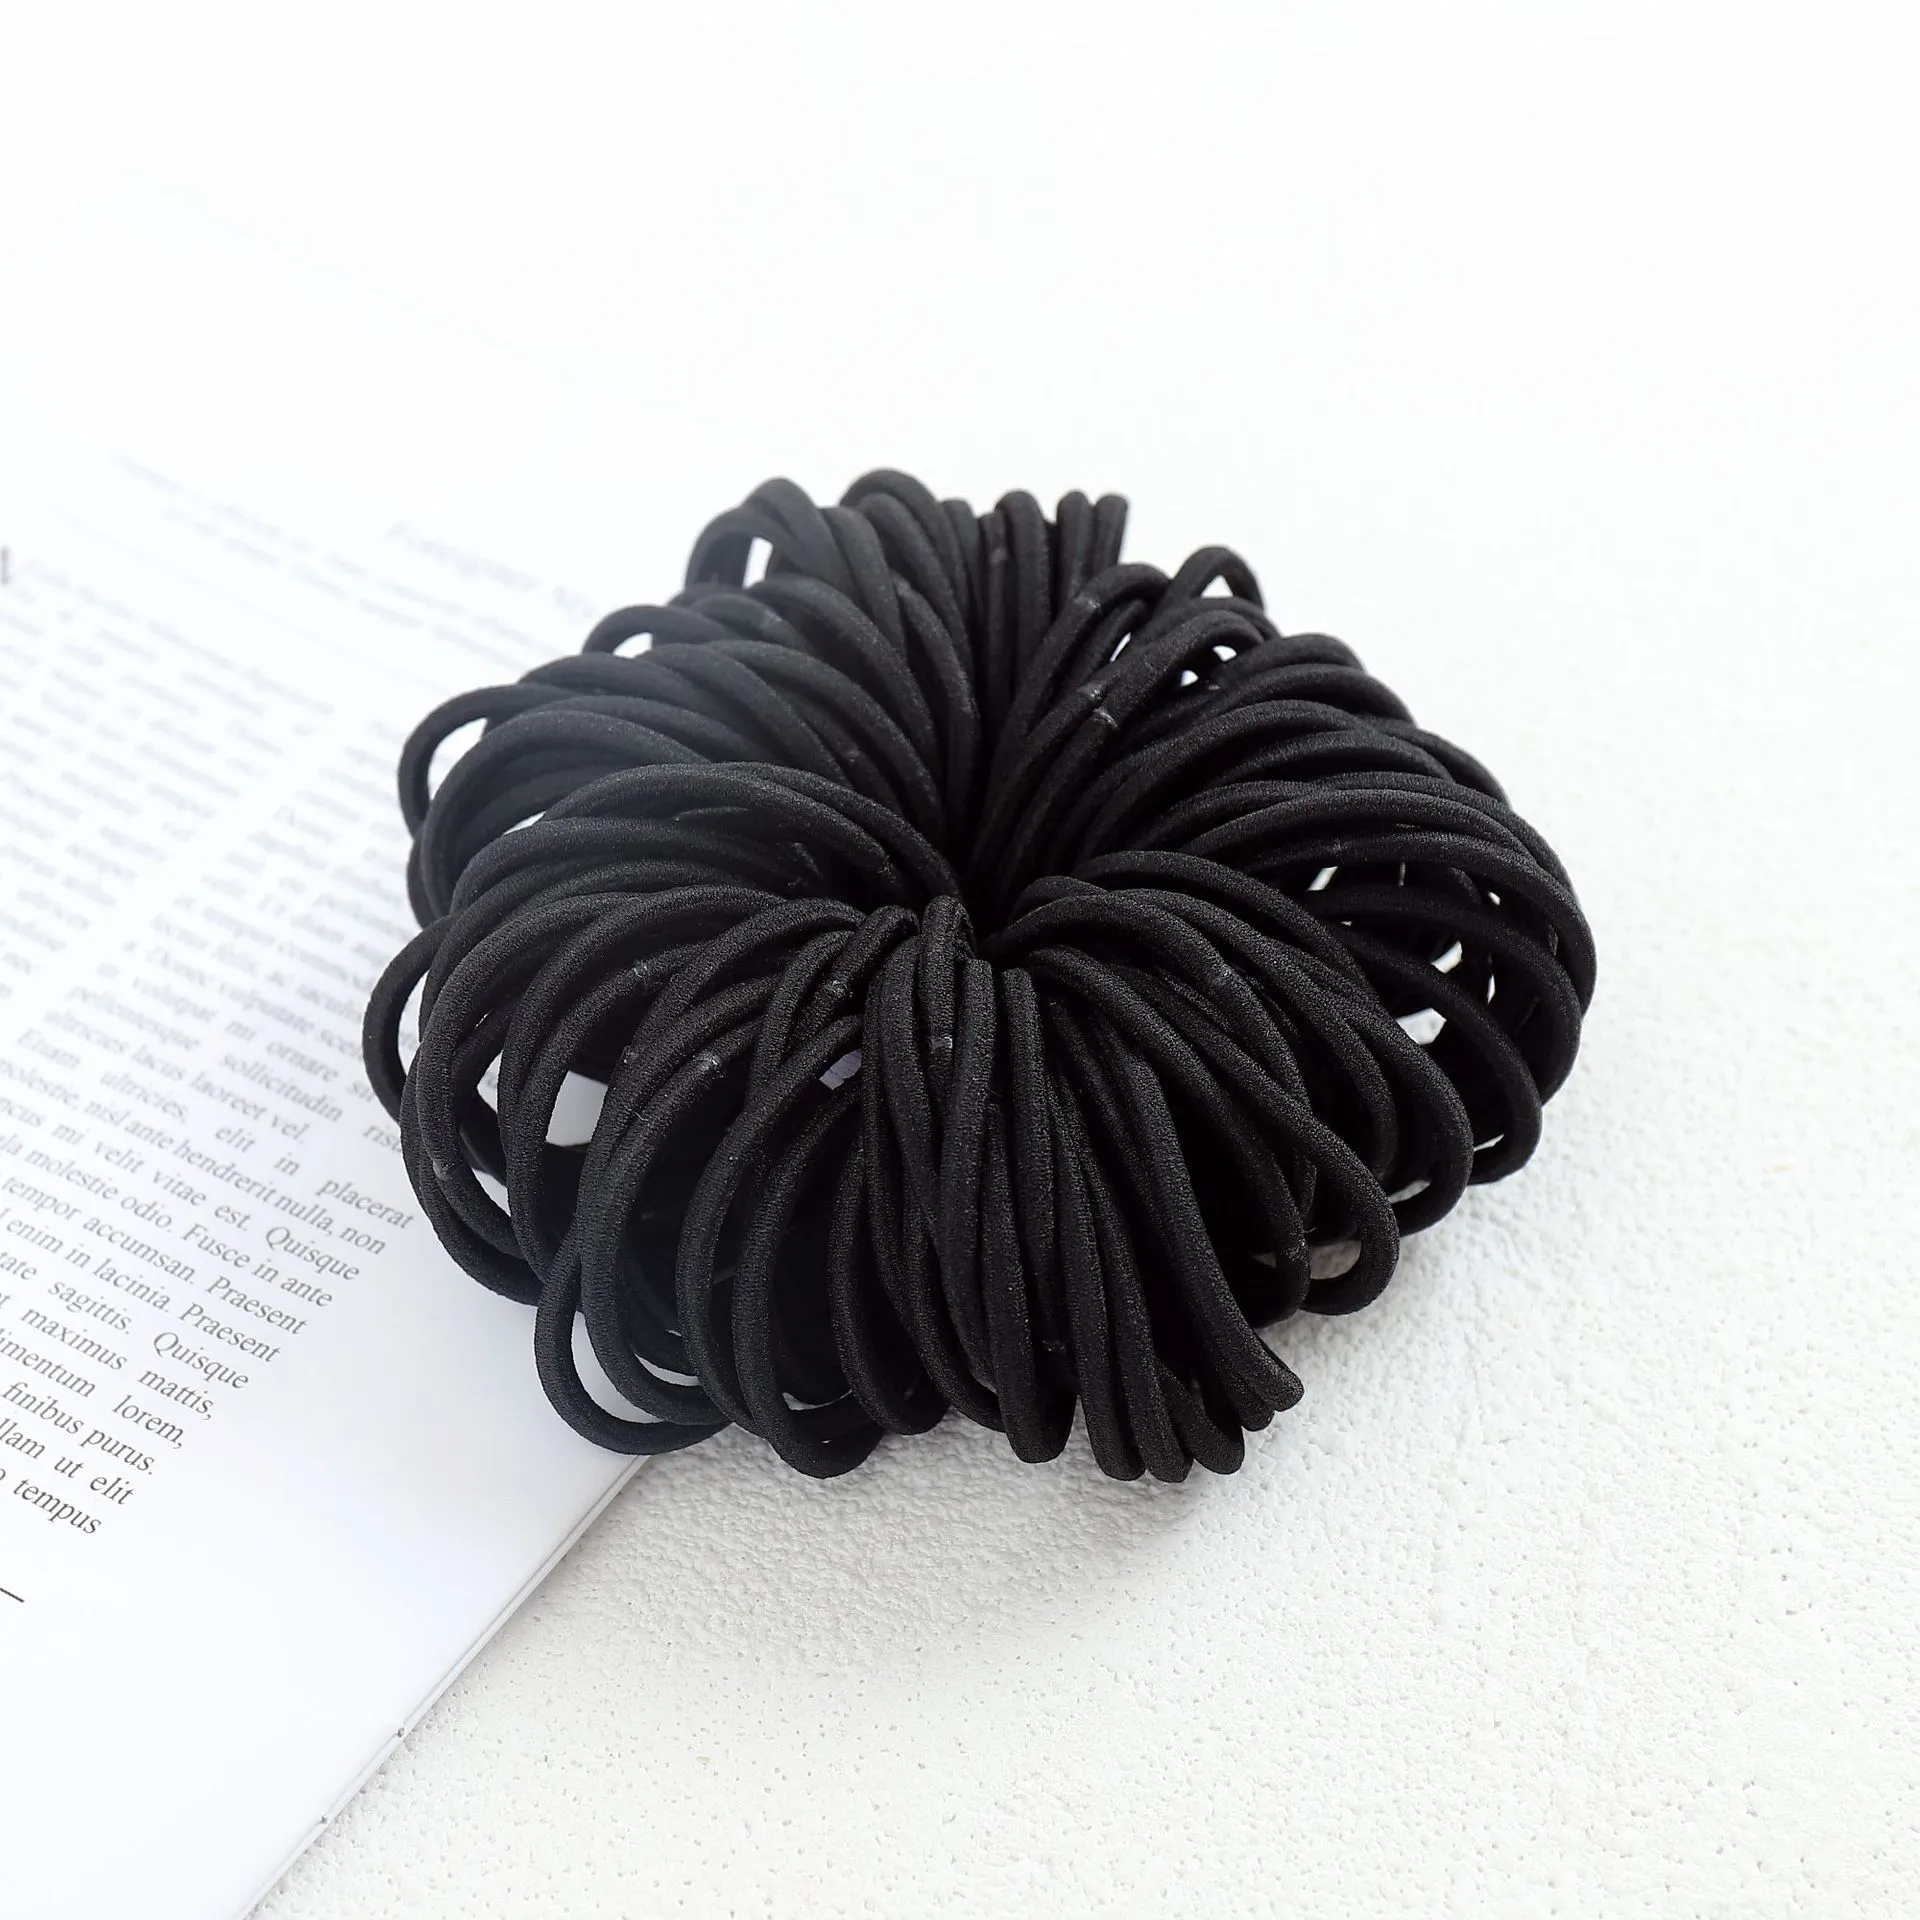 Black Color 50X4mm Elastic Bands Rubber Band School Kid Office Home Accessories Stretchable Band Sturdy Rubber Ring